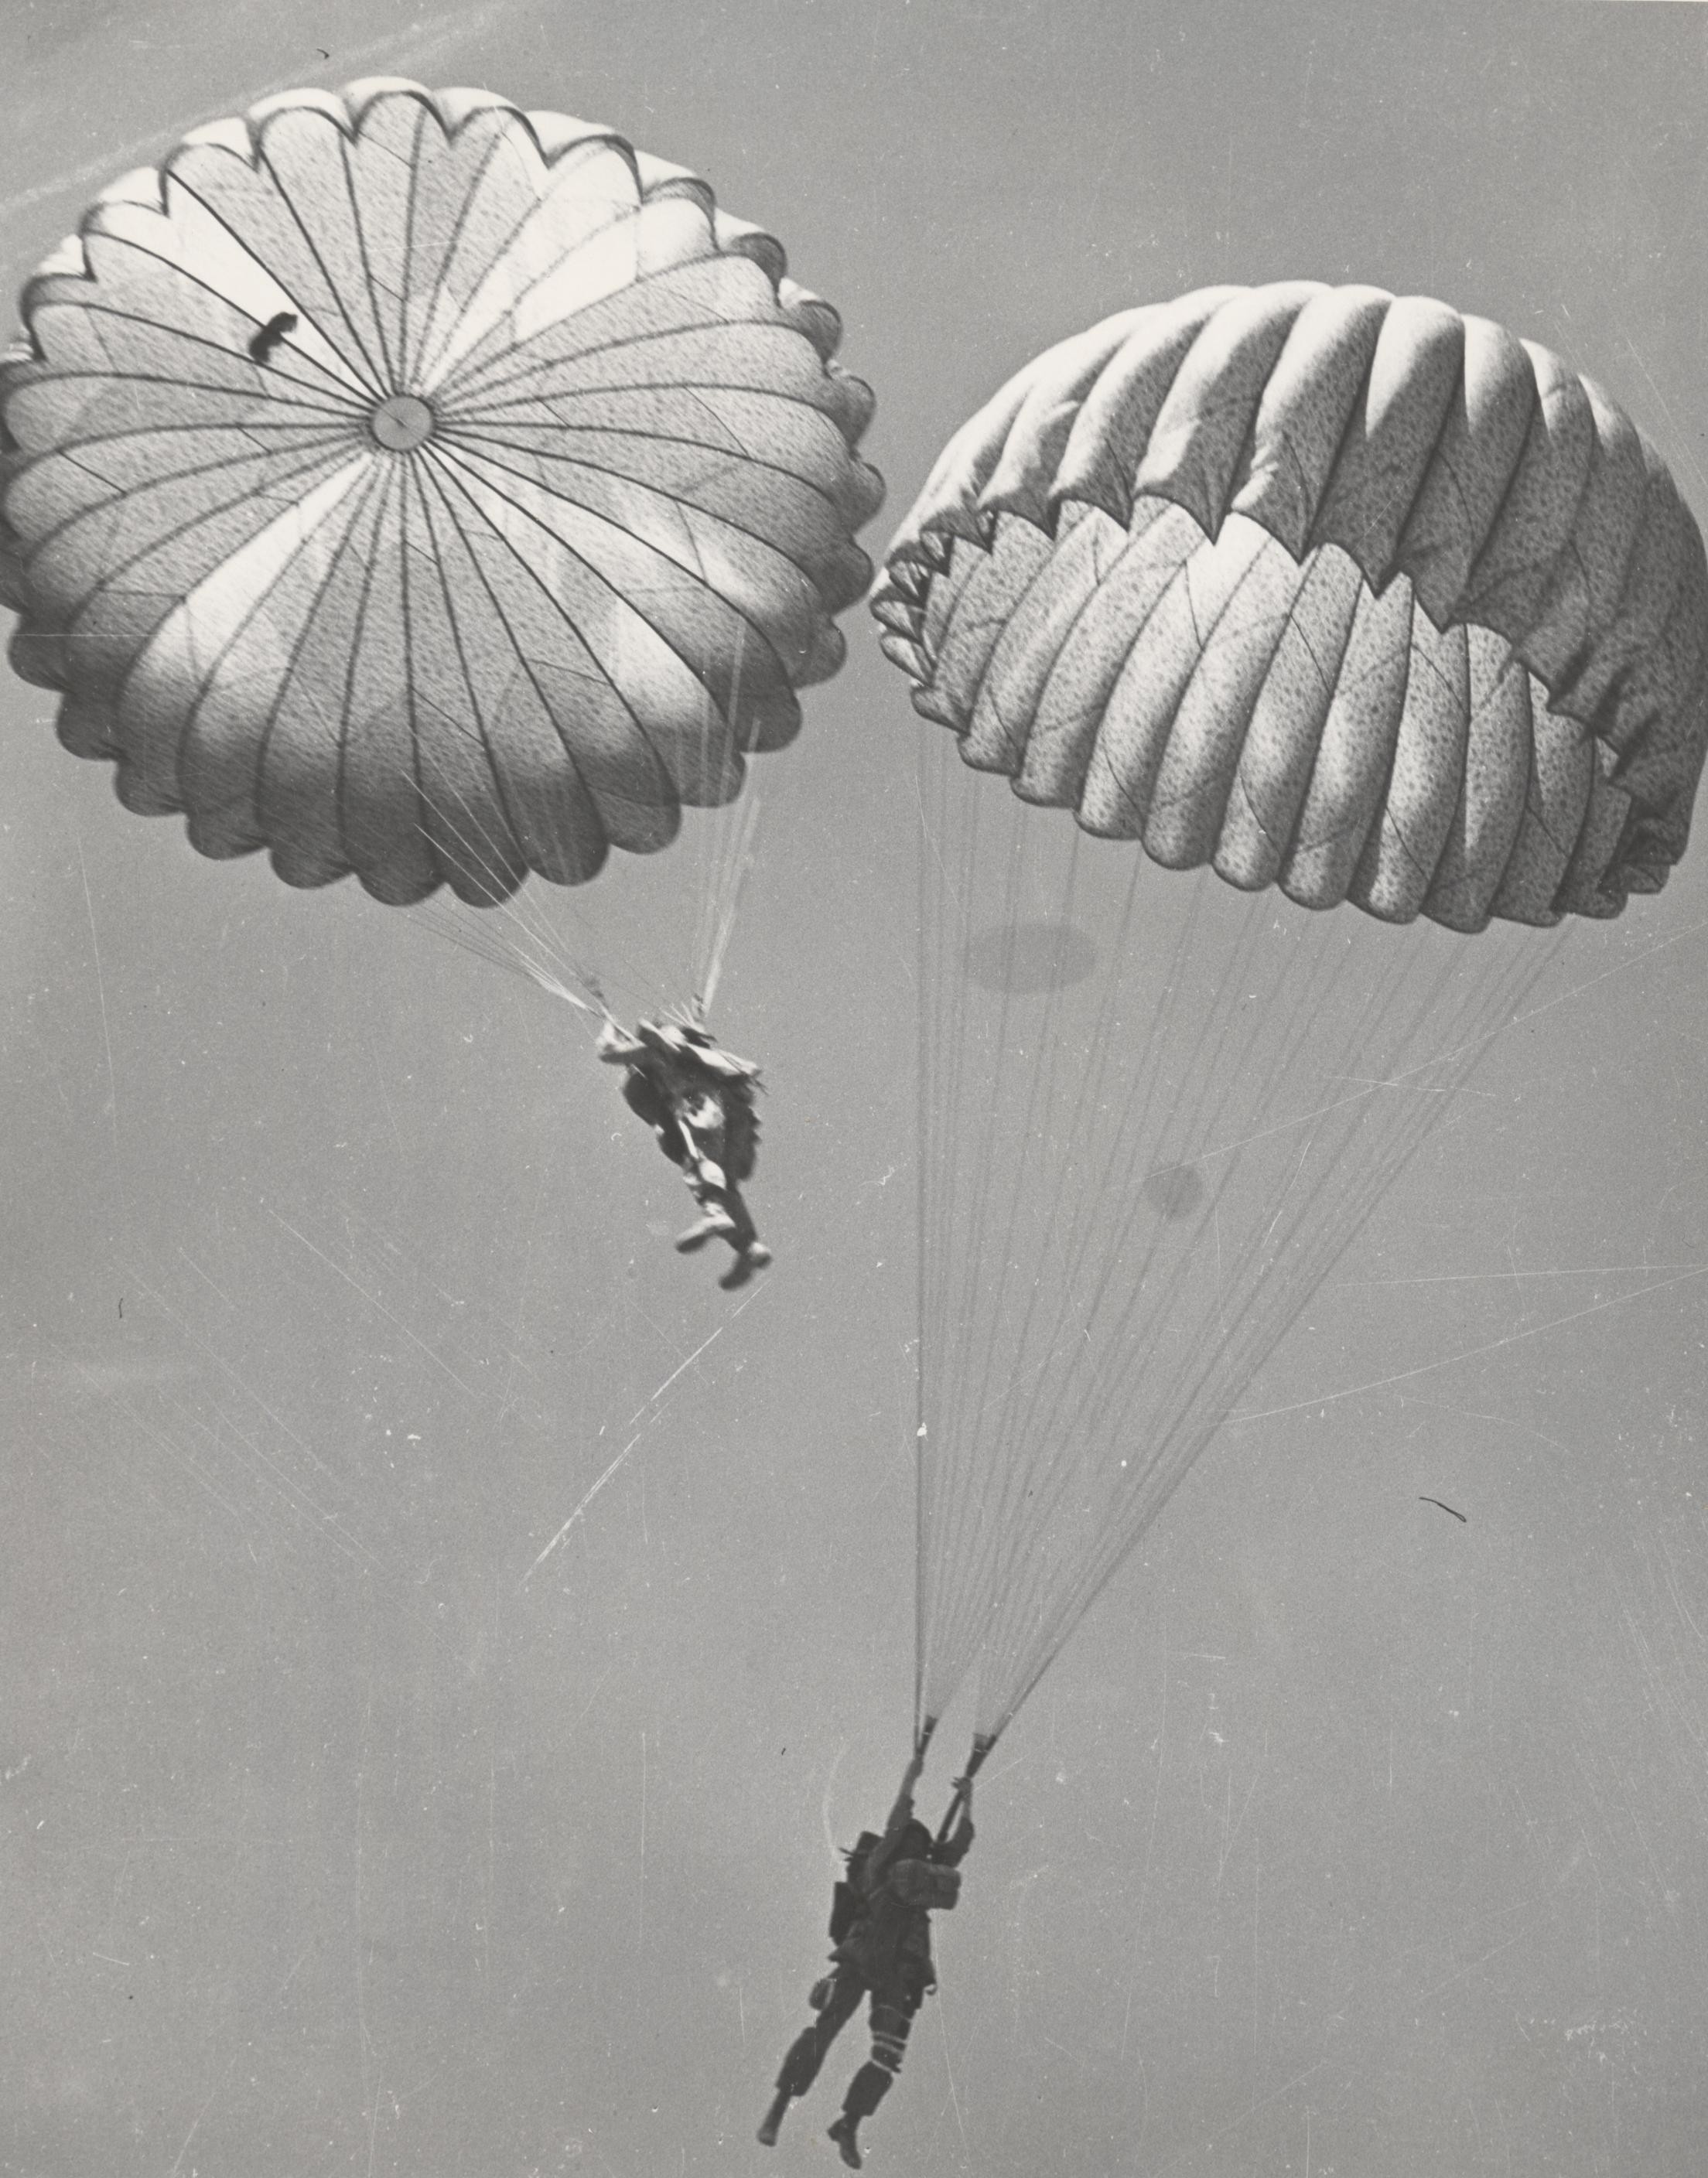 The First U.S. Army Airborne Operation, Article